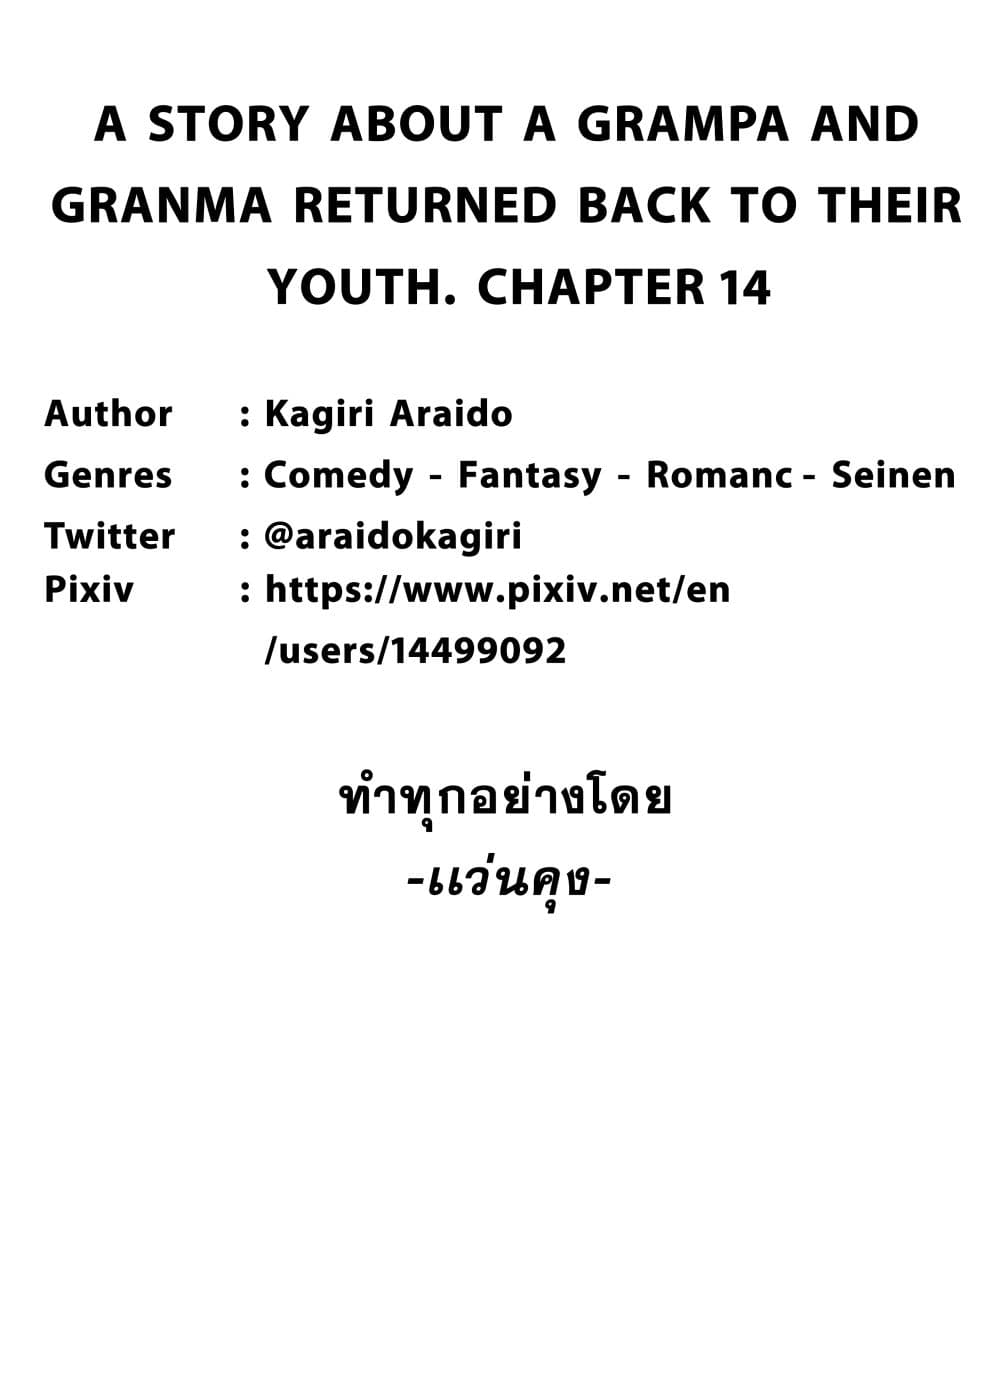 A Story About A Grampa and Granma Returned Back to their Youth คู่รักวัยดึกหวนคืนวัยหวาน 14-14